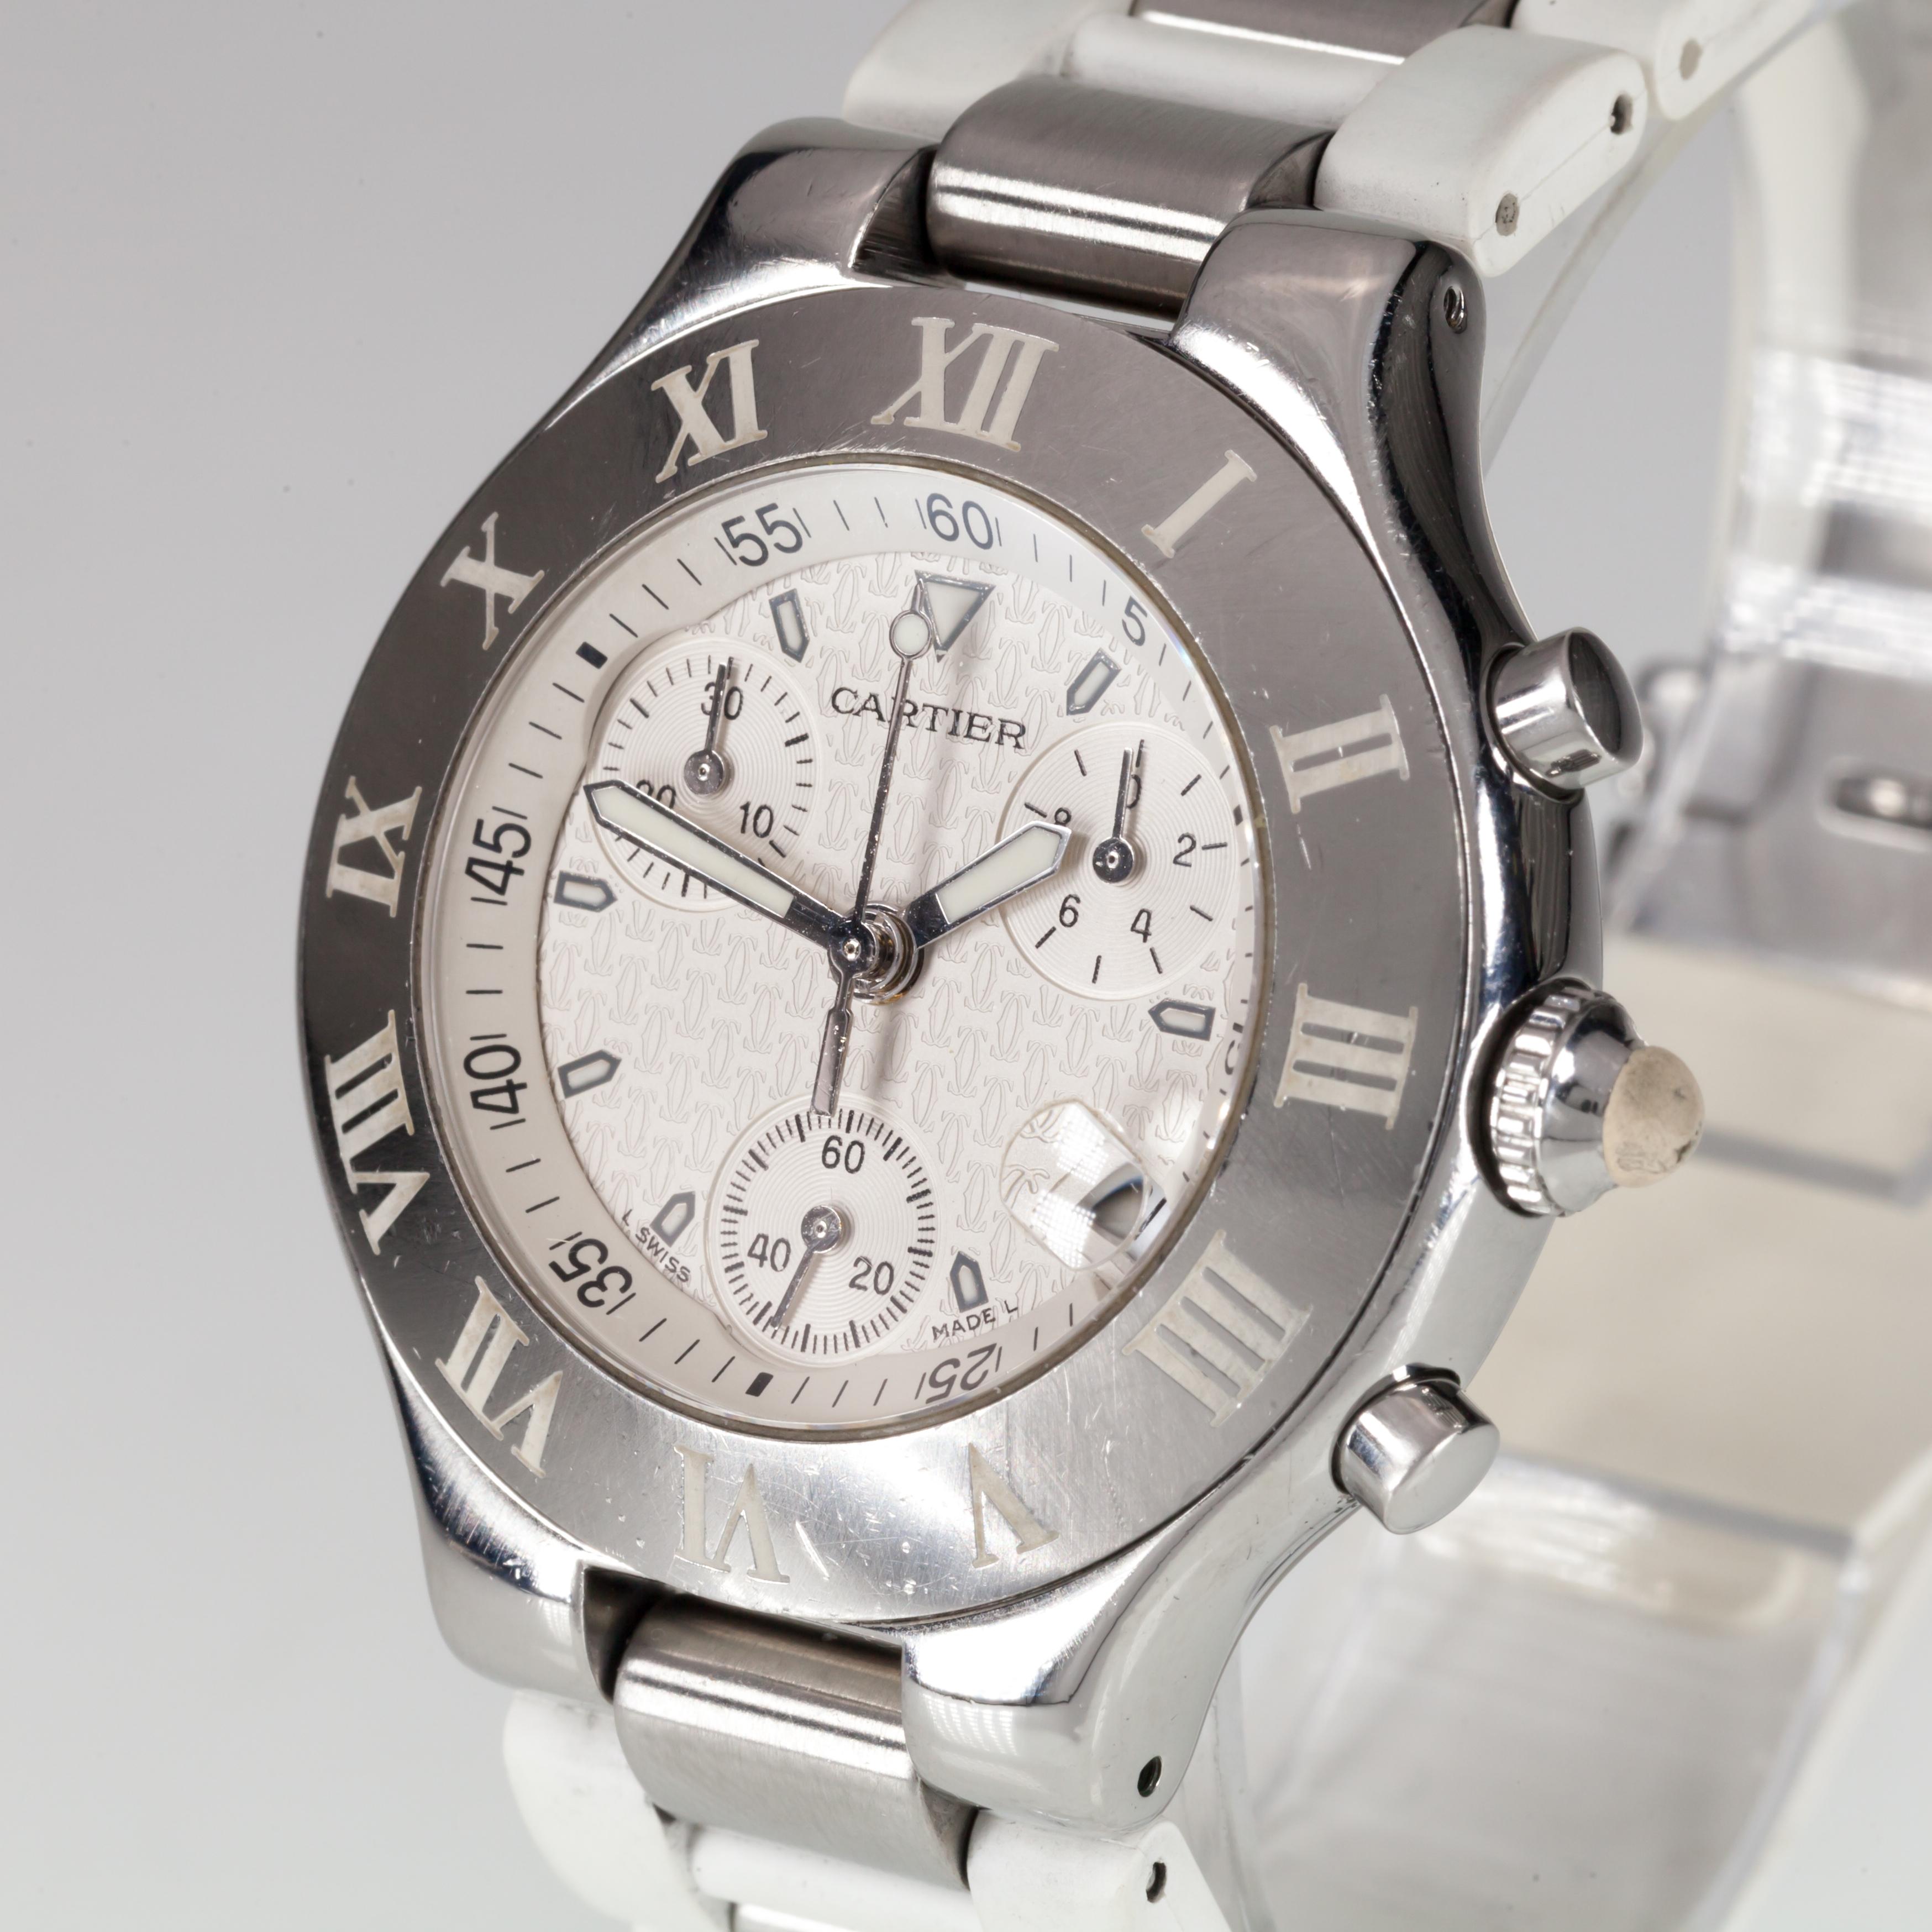 Model #2424
Serial #806827LX

Stainless Steel Case w/ Etched Roman Numeral Bezel
37 mm in Diameter (42 mm w/ Crown)
NOTE: Some minor damage to rubber accent on crown
Lug-to-Lug Distance = 43 mm
Lug-to-Lug Width = 10 mm
Thickness = 10 mm

White